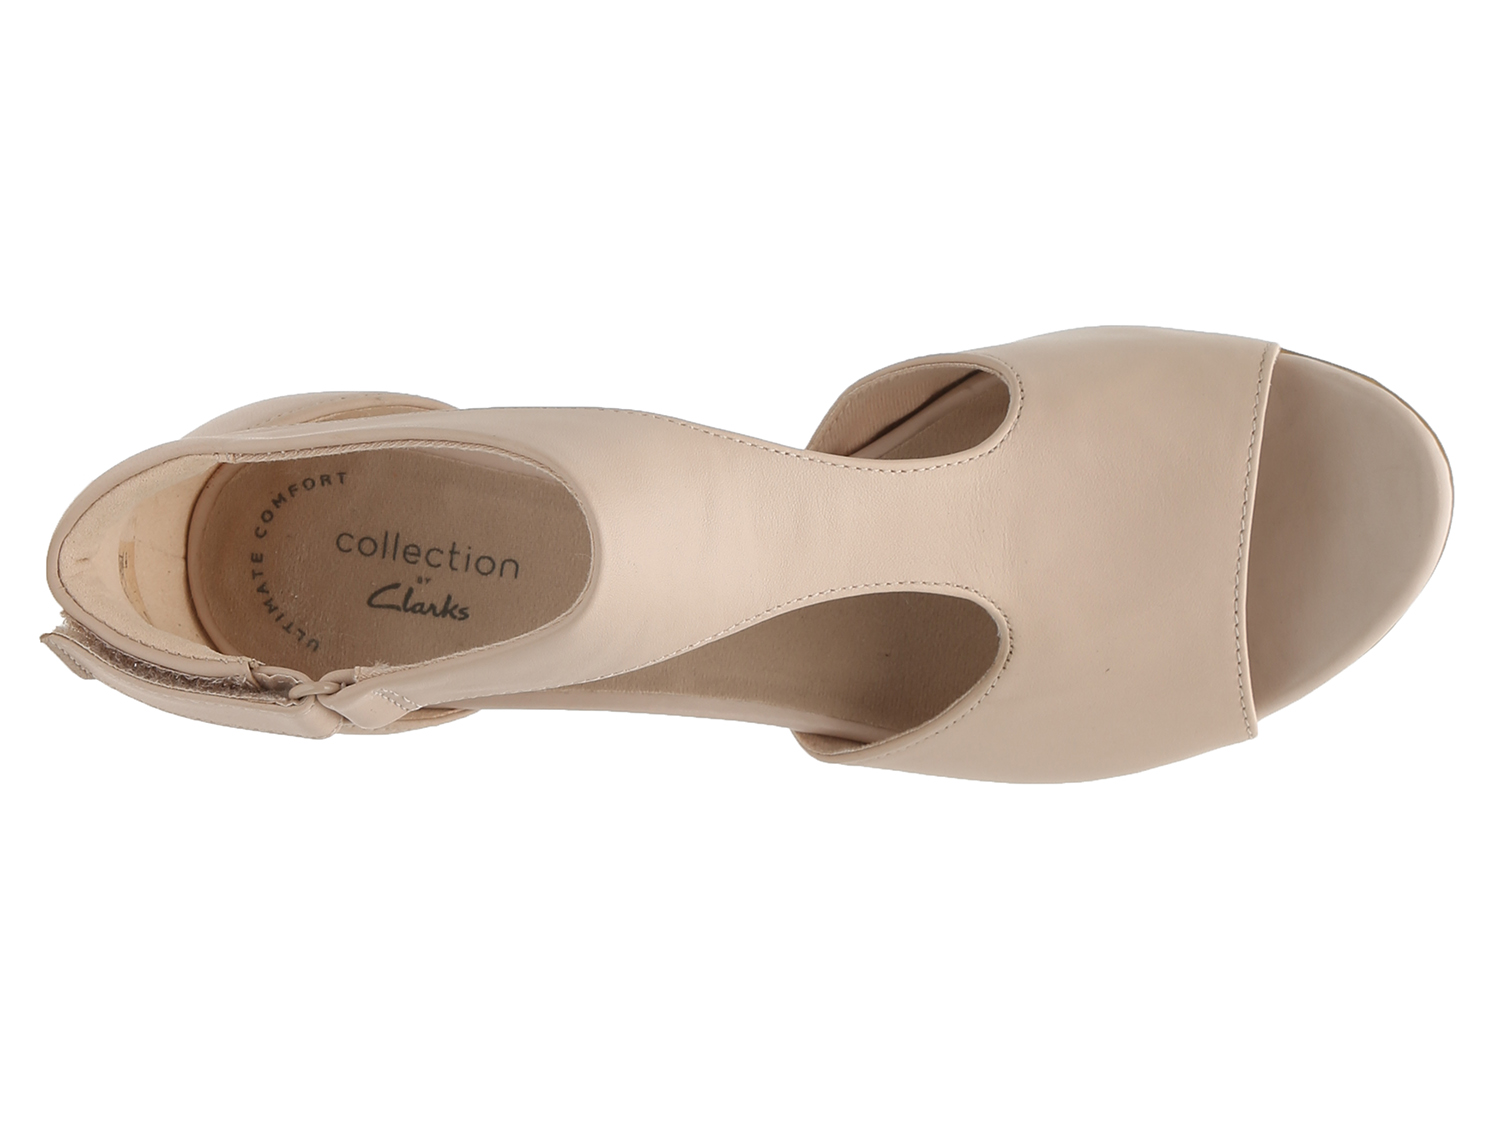 NEW CLARKS ALICE MAE WOMENS SAND LEATHER SHOES